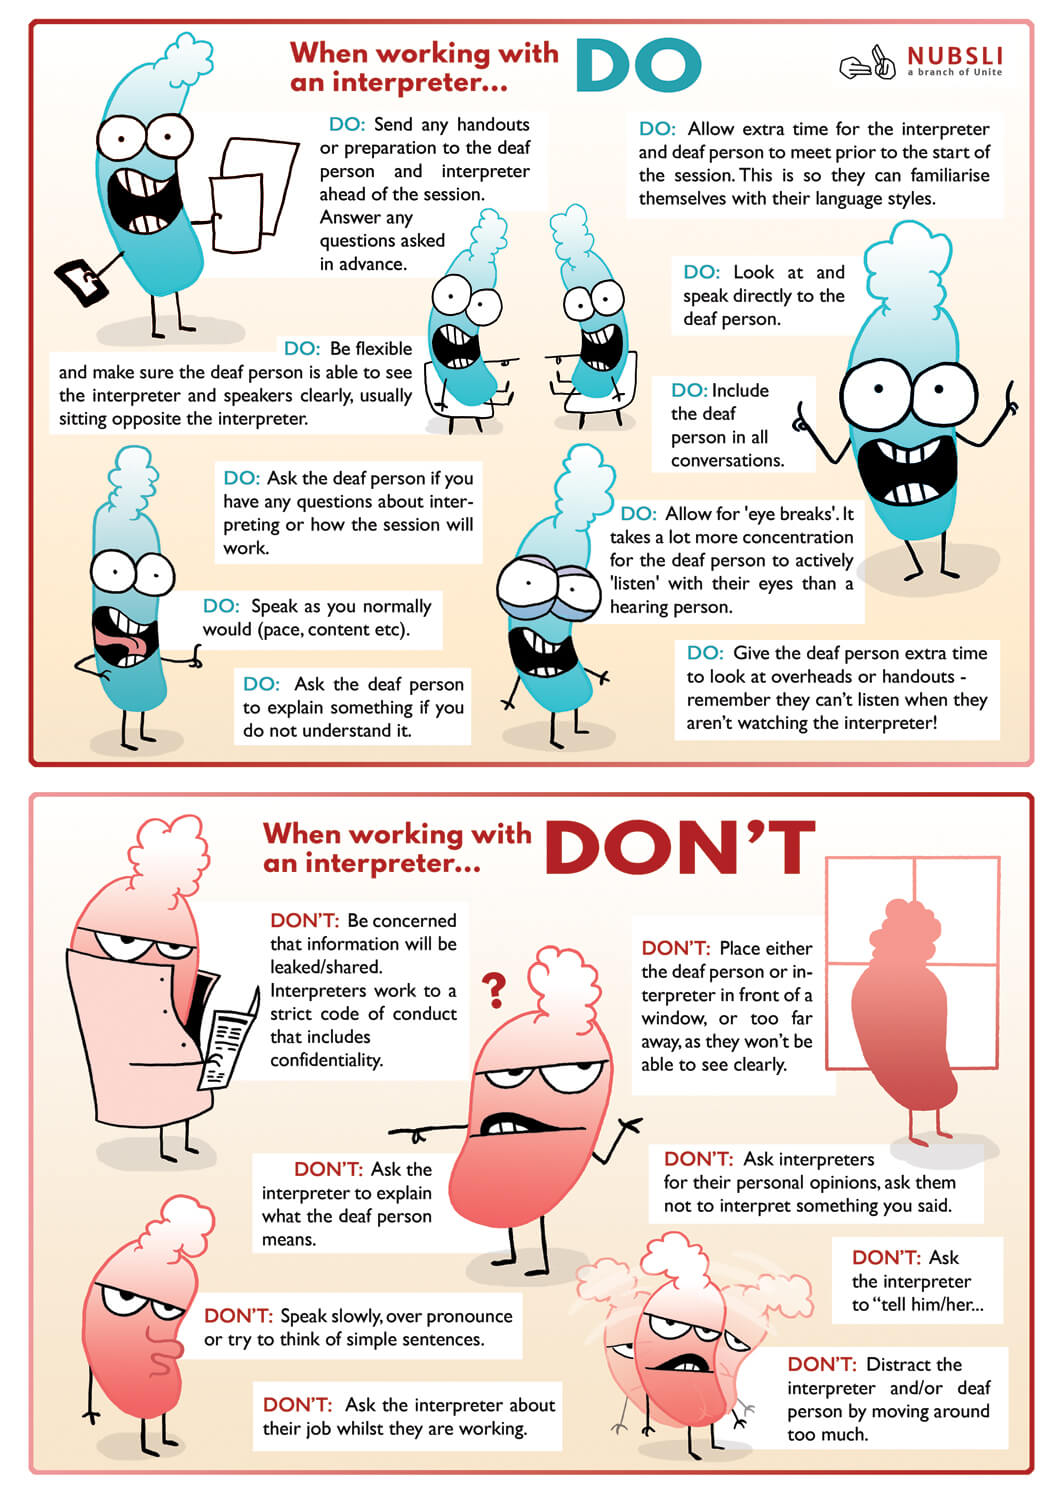 The dos and don'ts of using an interpreter explained by a caricature